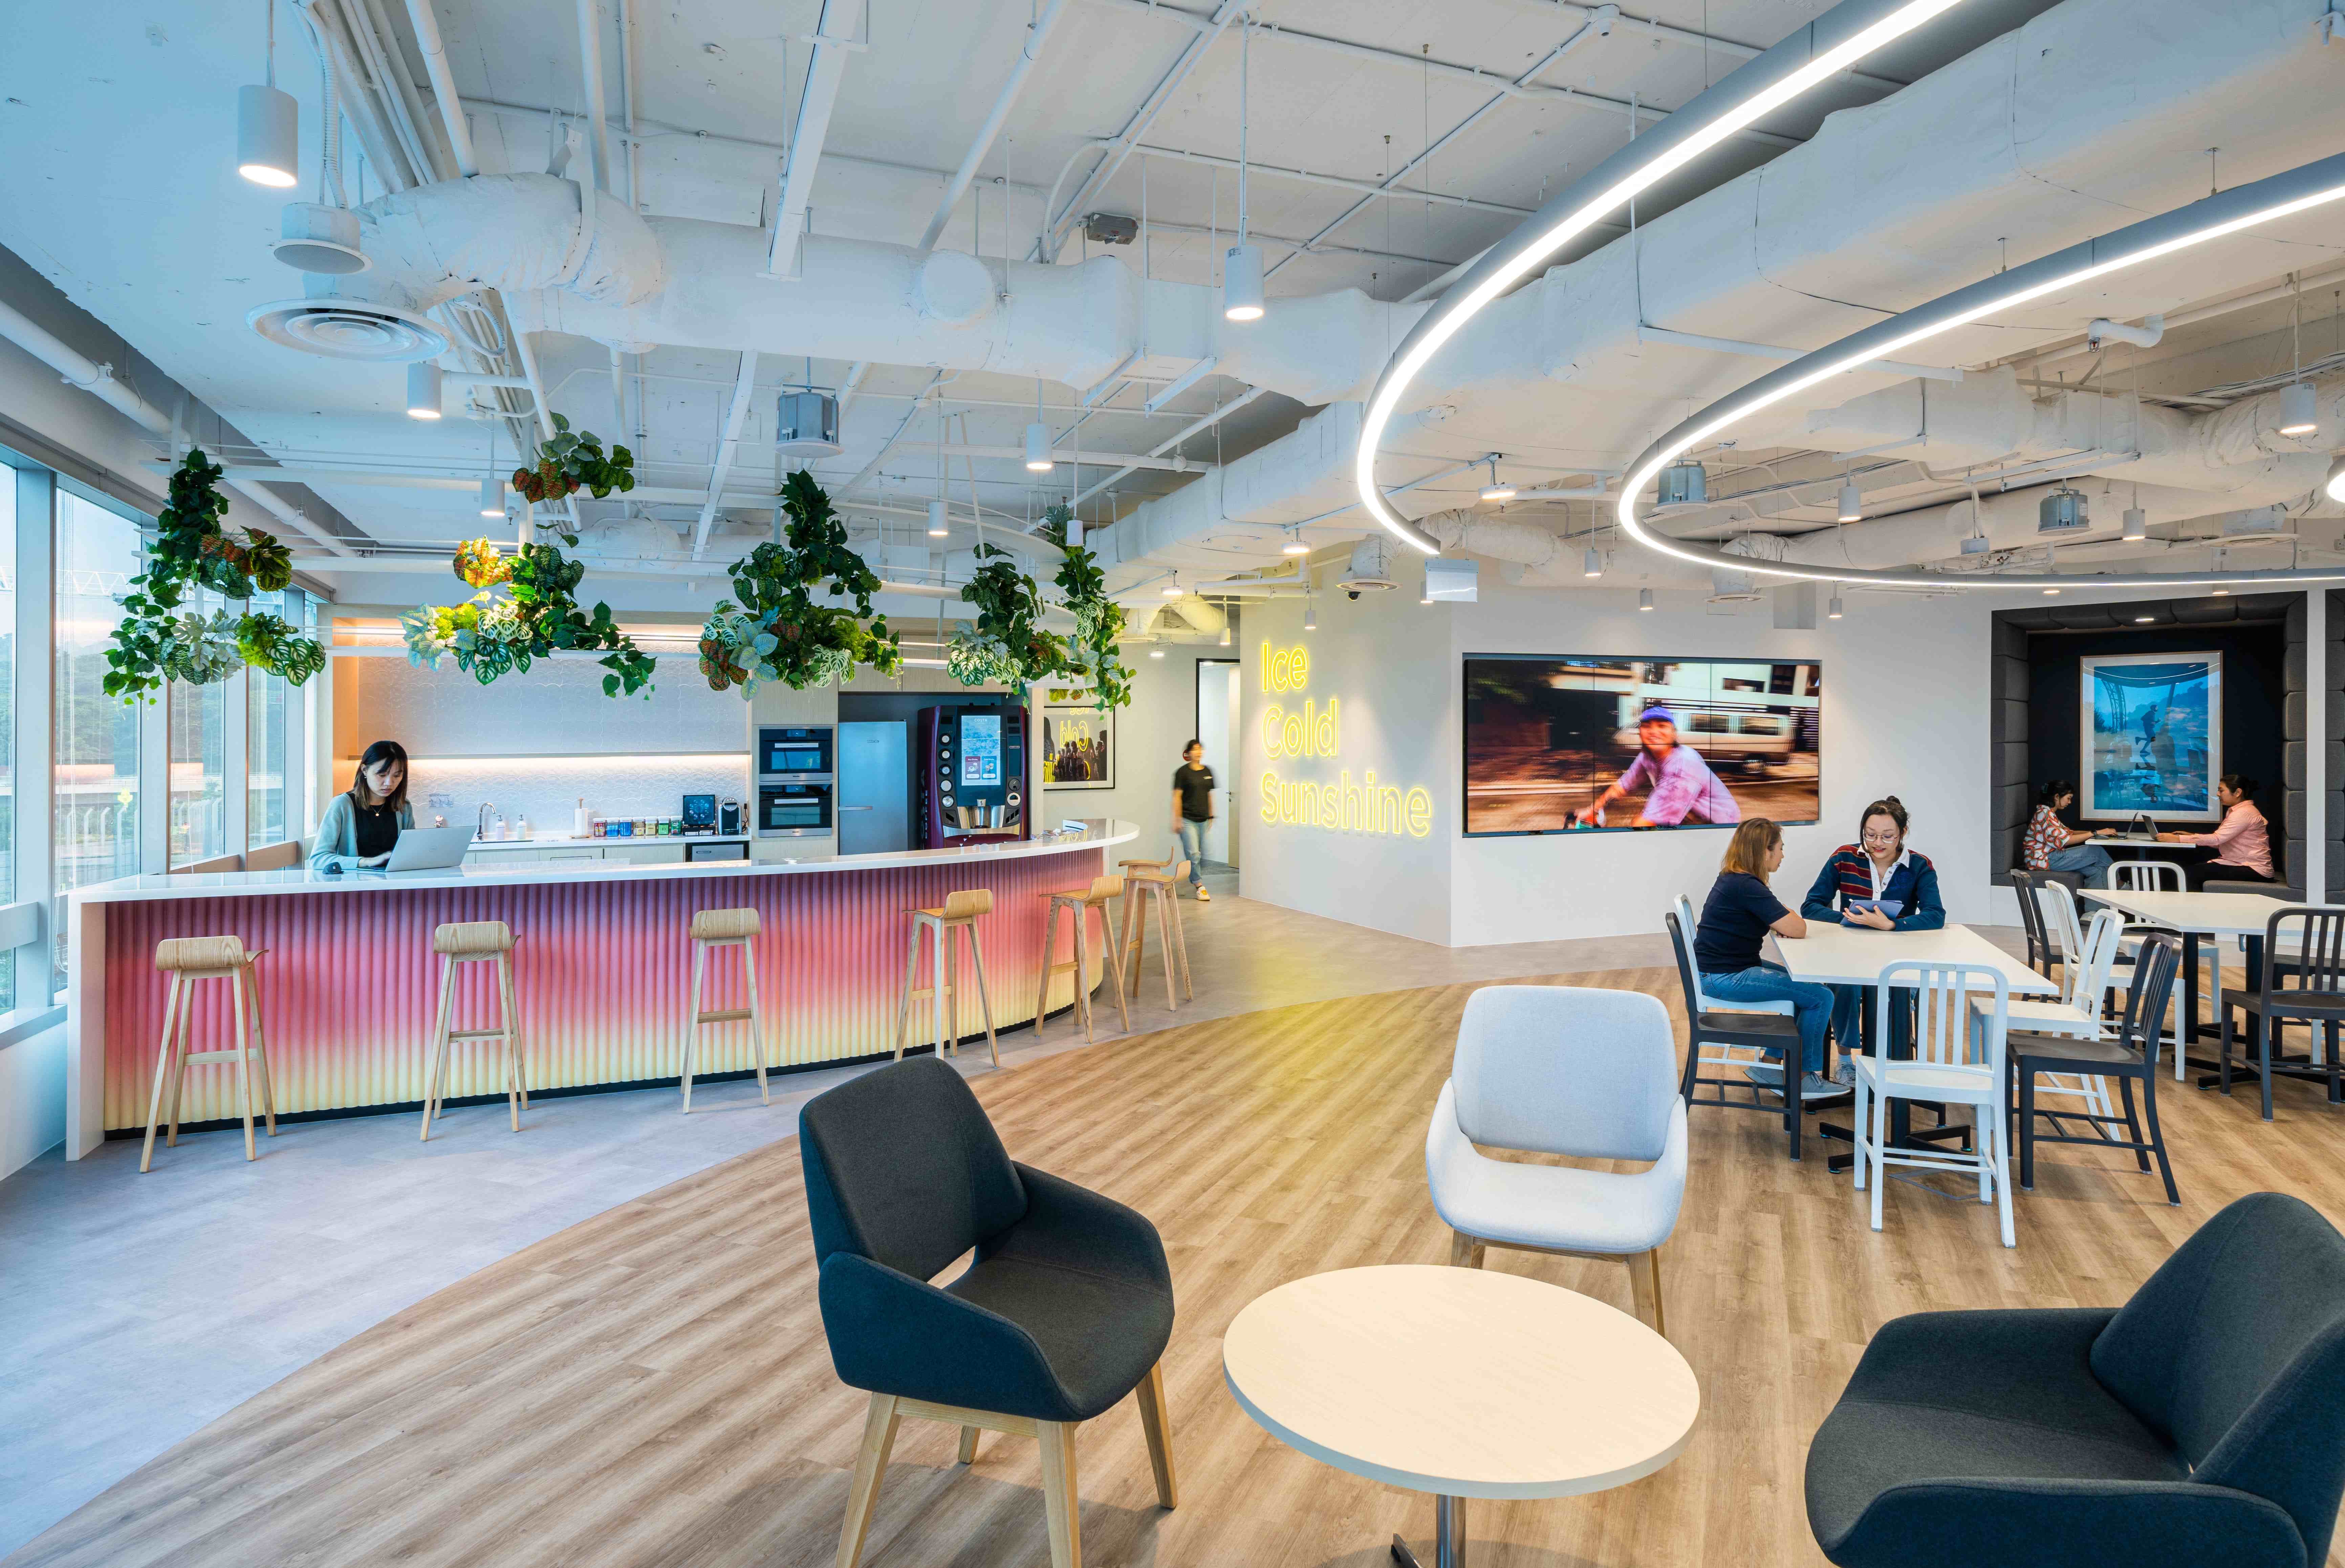 CocaCola Office Design - Inspiring and Flexible Workspace Environment